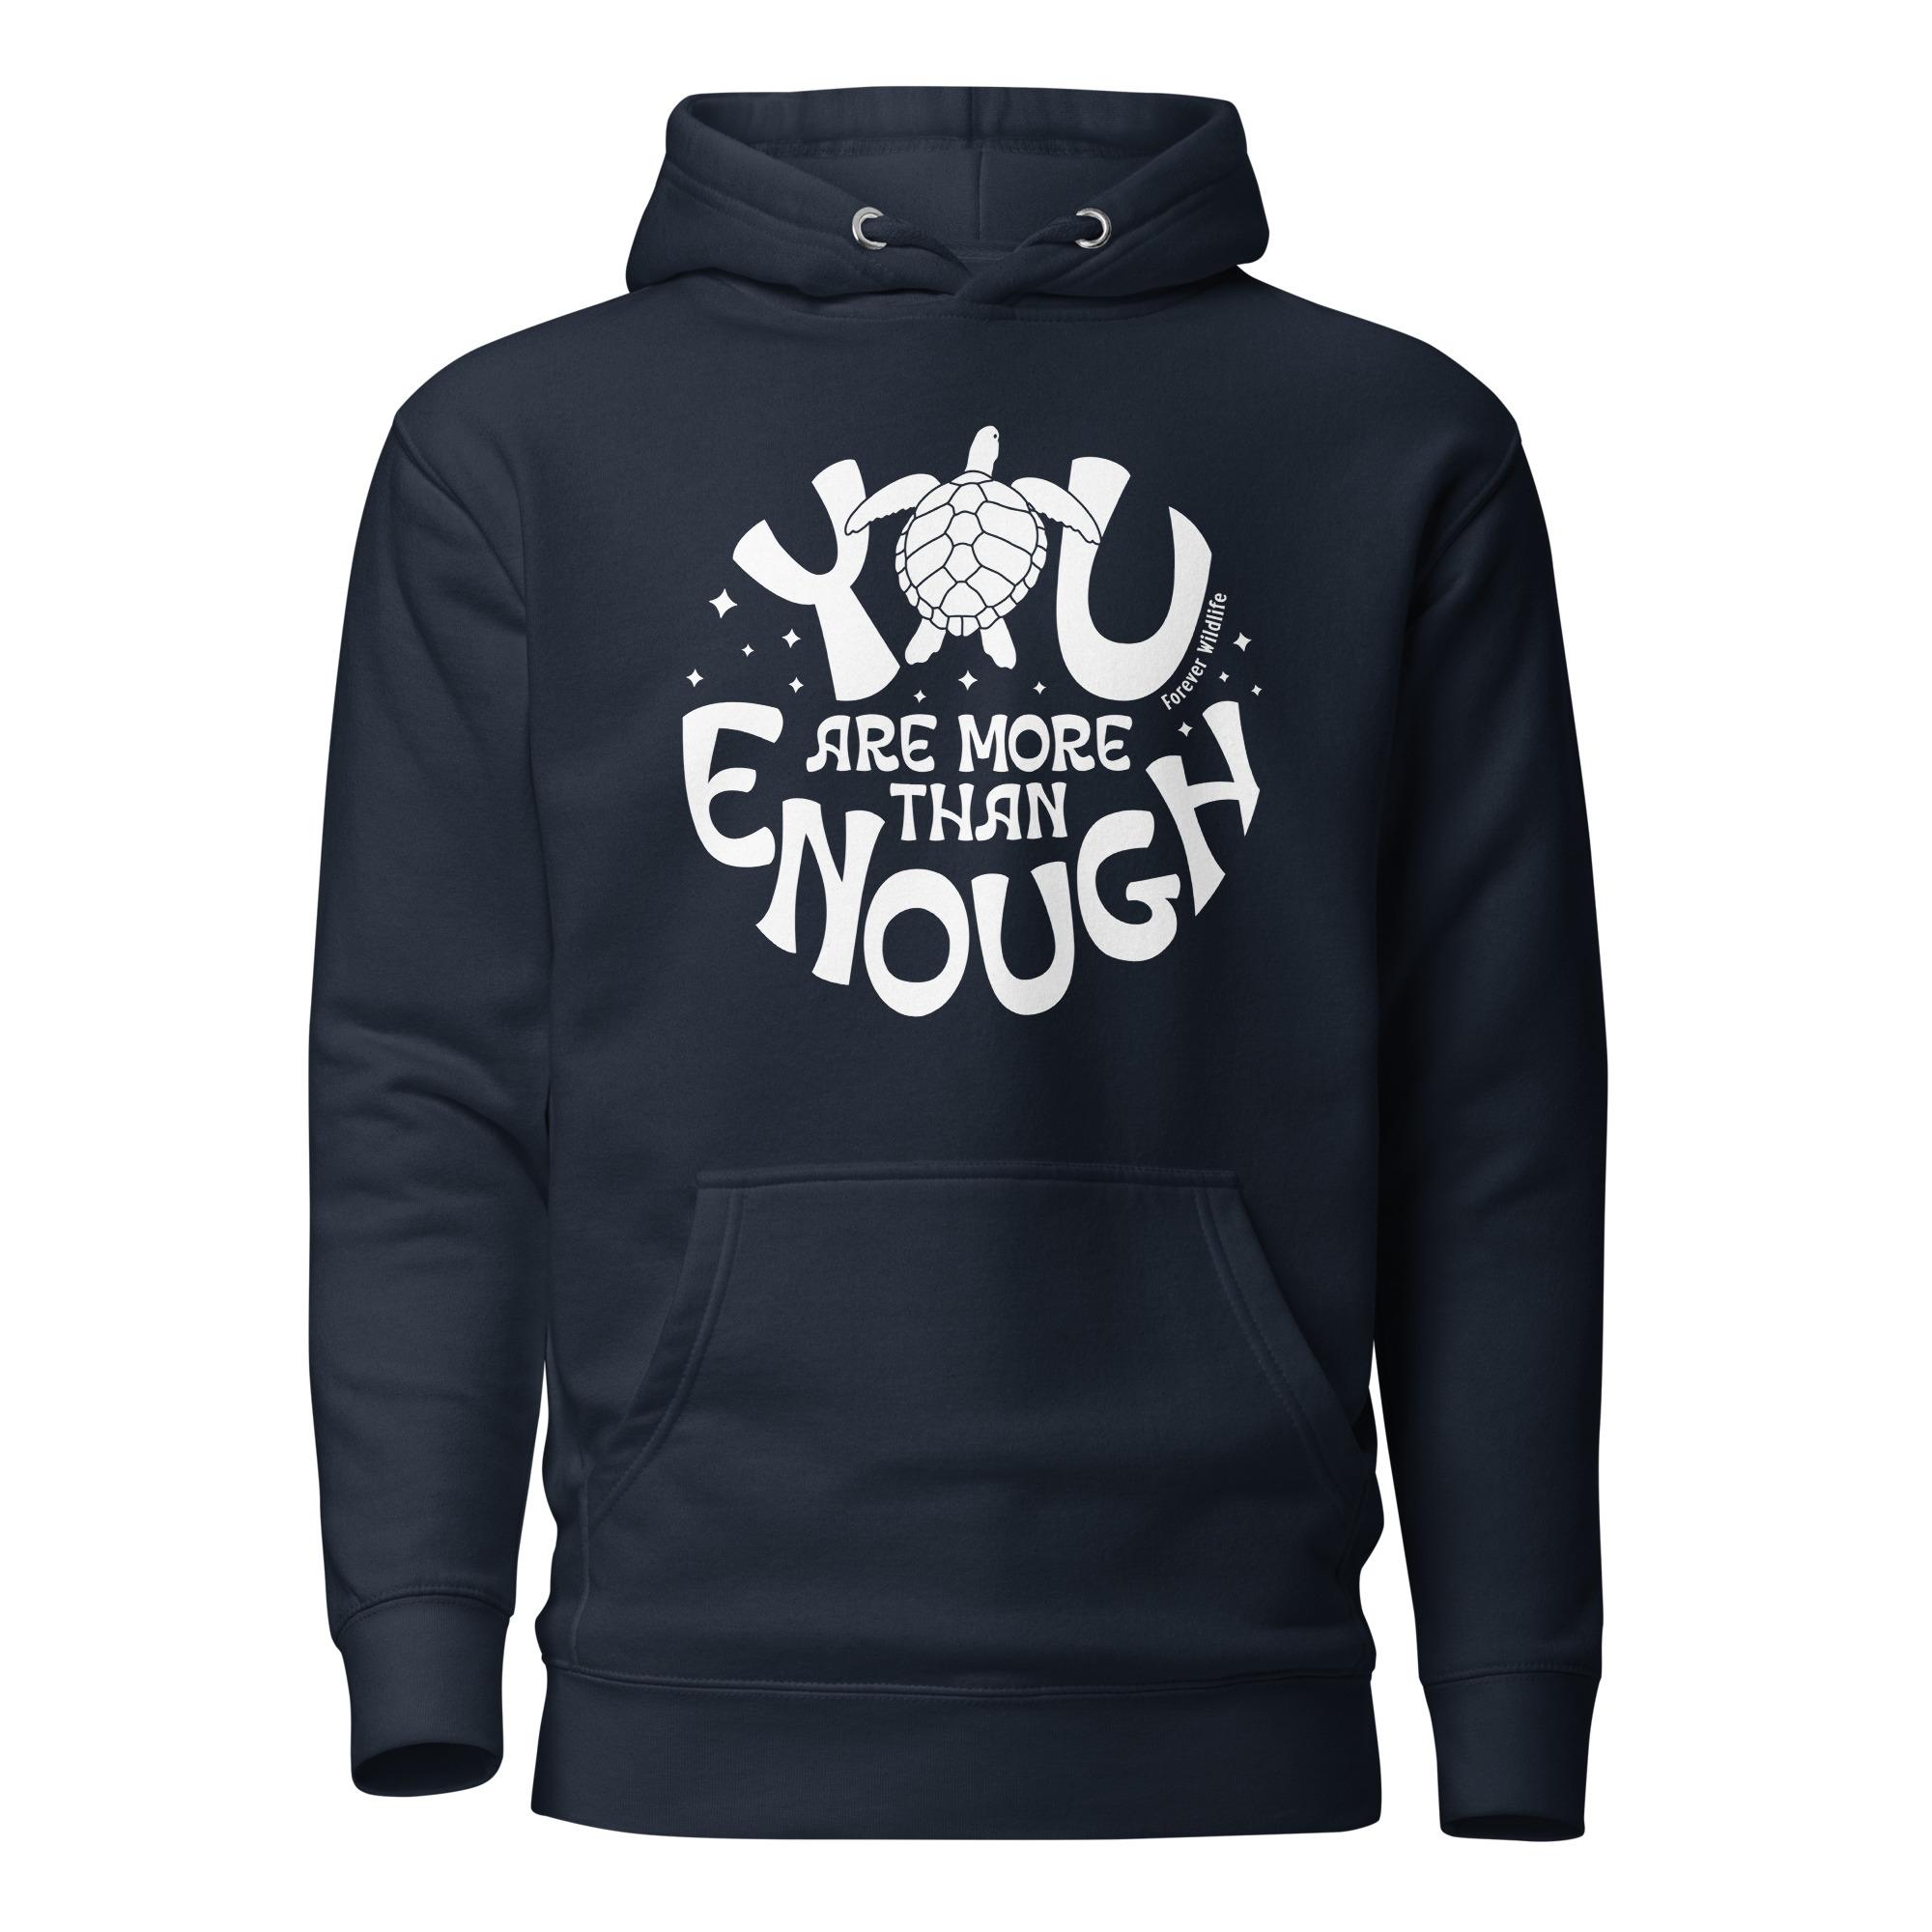 Sea Turtle Hoodie in Navy – Premium Wildlife Animal Inspirational Hoodie Design with YOu Are More Than Enough text, part of Wildlife Hoodies & Clothing from Forever Wildlife